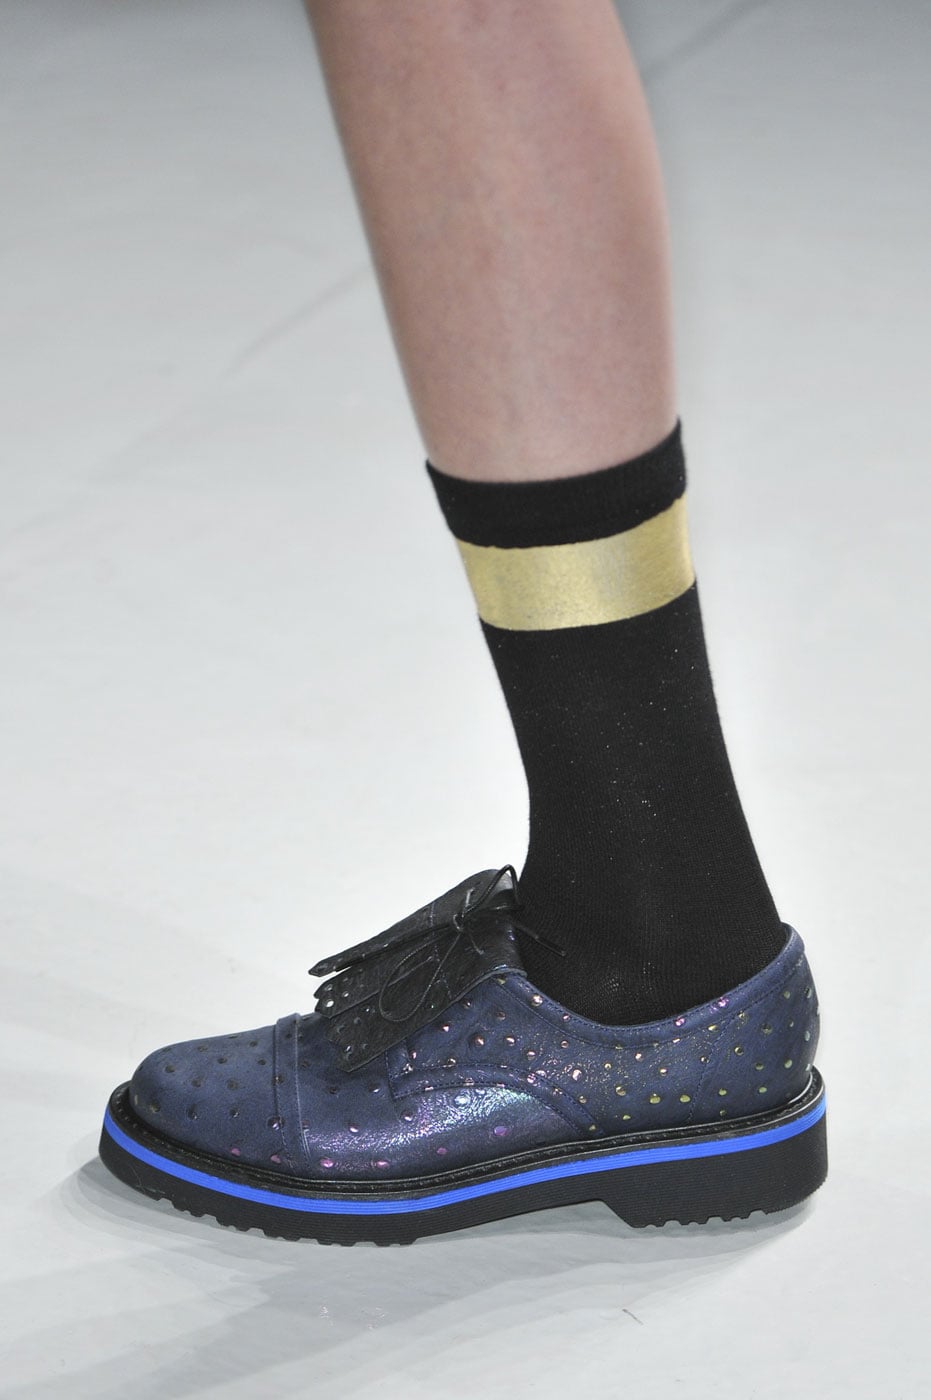 Suno Fall 2014 | See Fall's Best Runway Shoes Right Here, Right Now |  POPSUGAR Fashion Photo 198